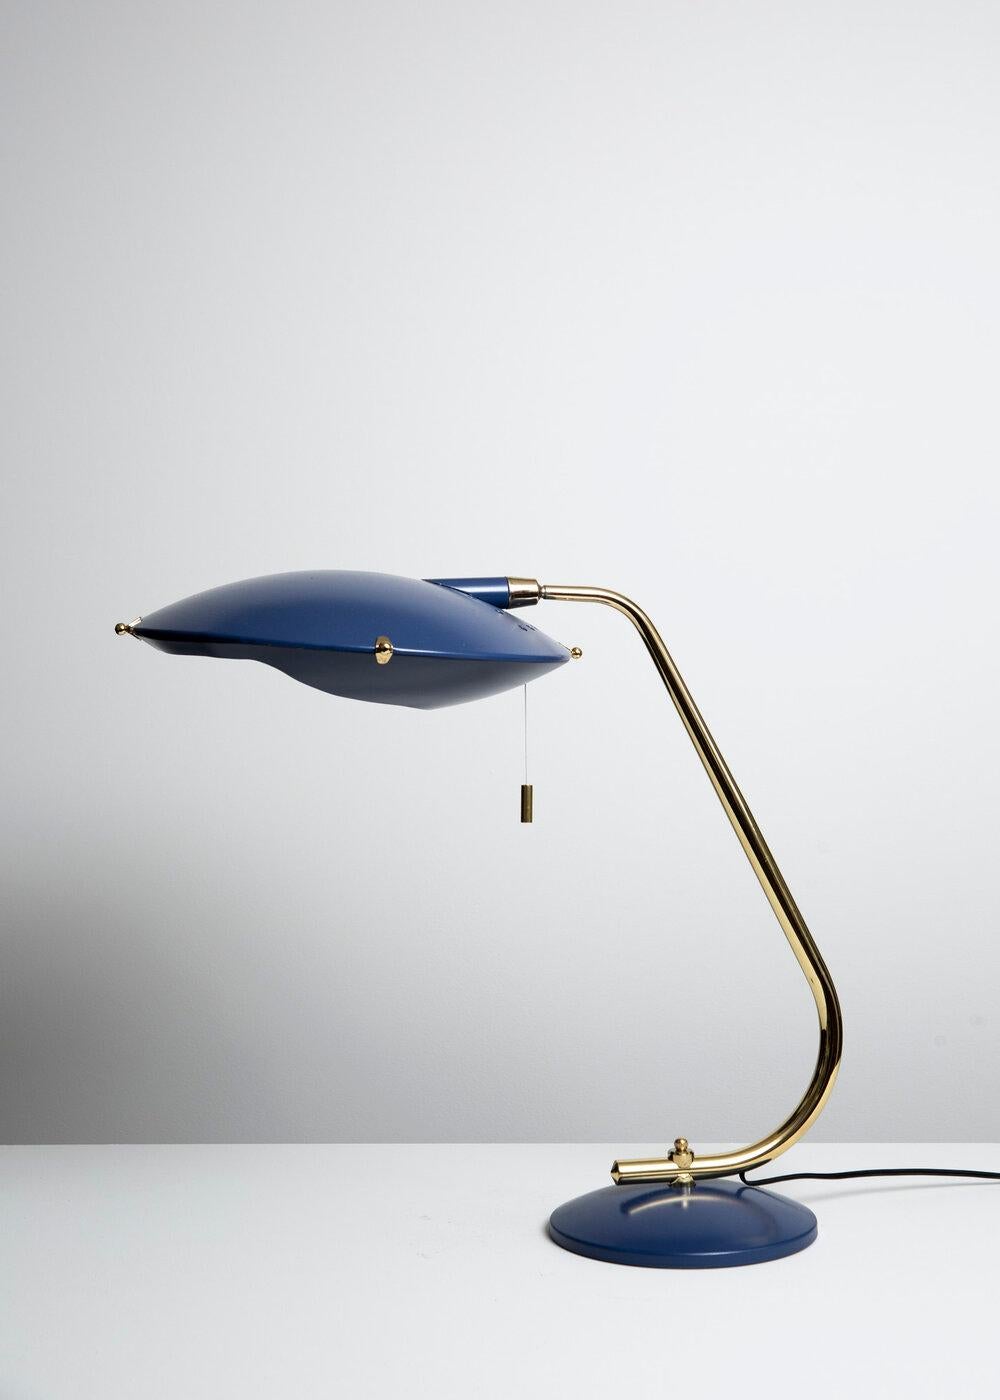 Jacques Biny Attributed Jupiter Desk Lamp for Aluminor In Good Condition For Sale In Montréal, QC